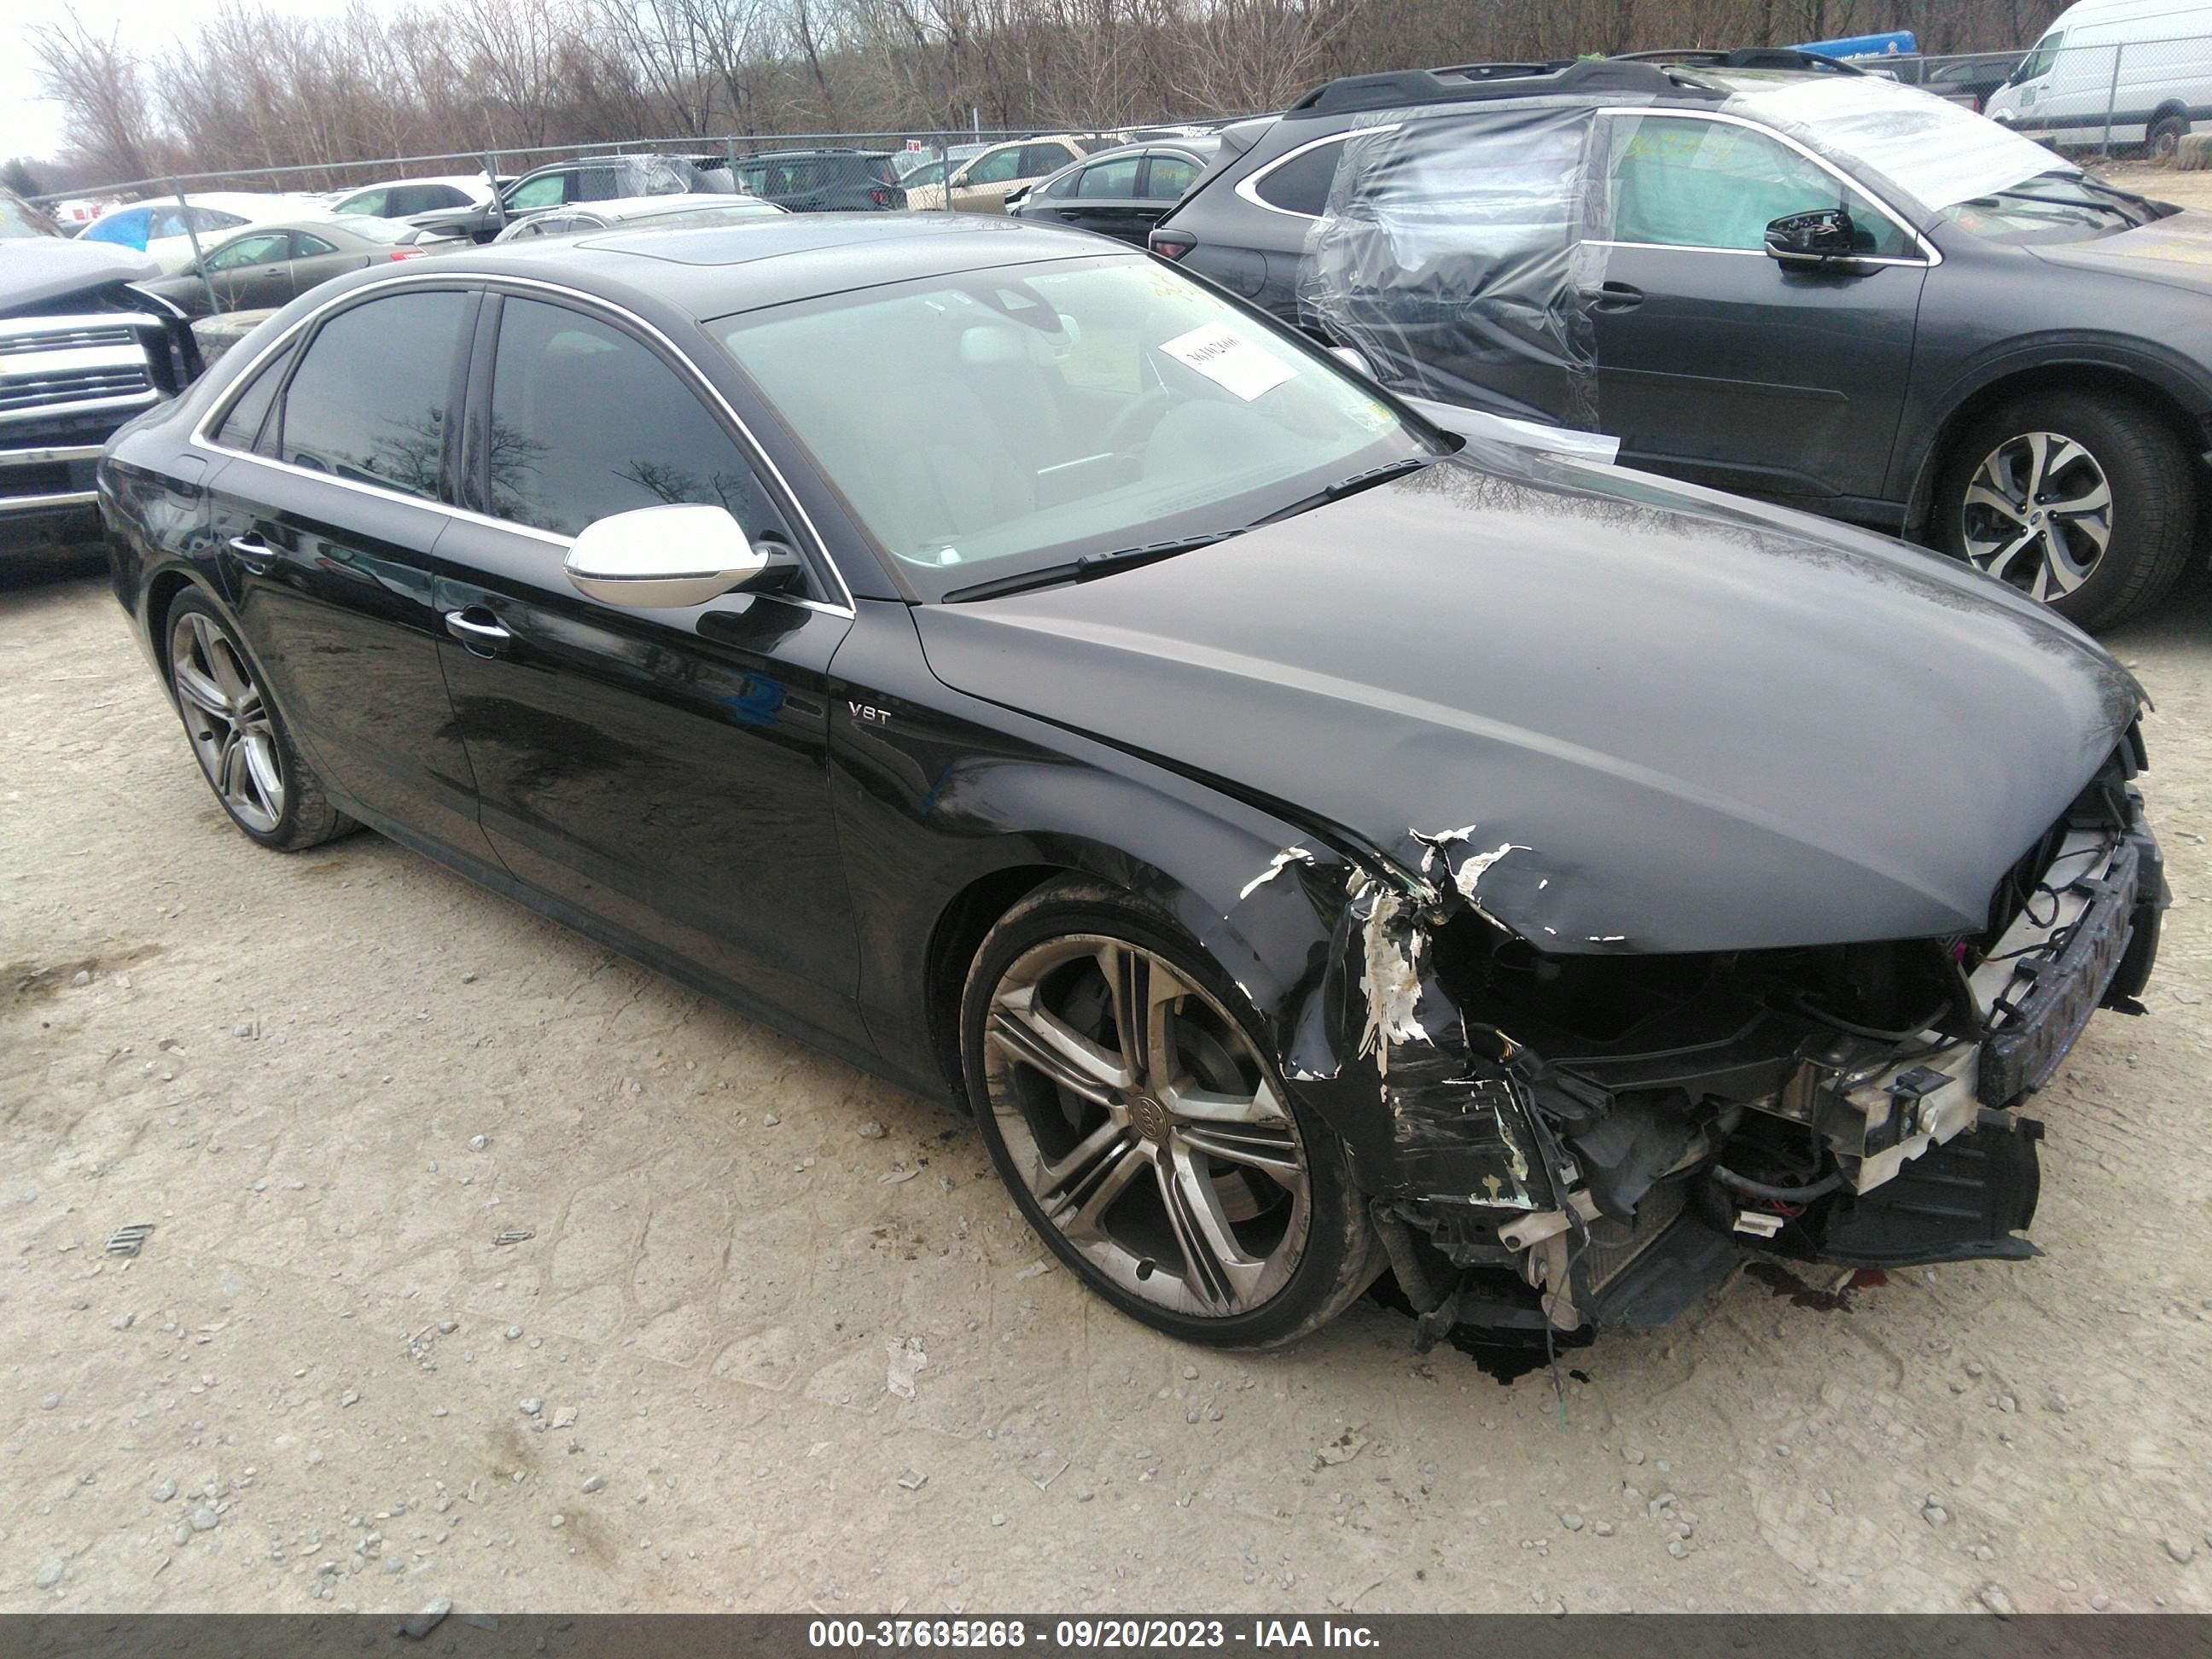 vin: WAUD2AFD0DN005703 WAUD2AFD0DN005703 2013 audi s8 4000 for Sale in 12575, 39 Stone Castle Rd, Rock Tavern, New York, USA